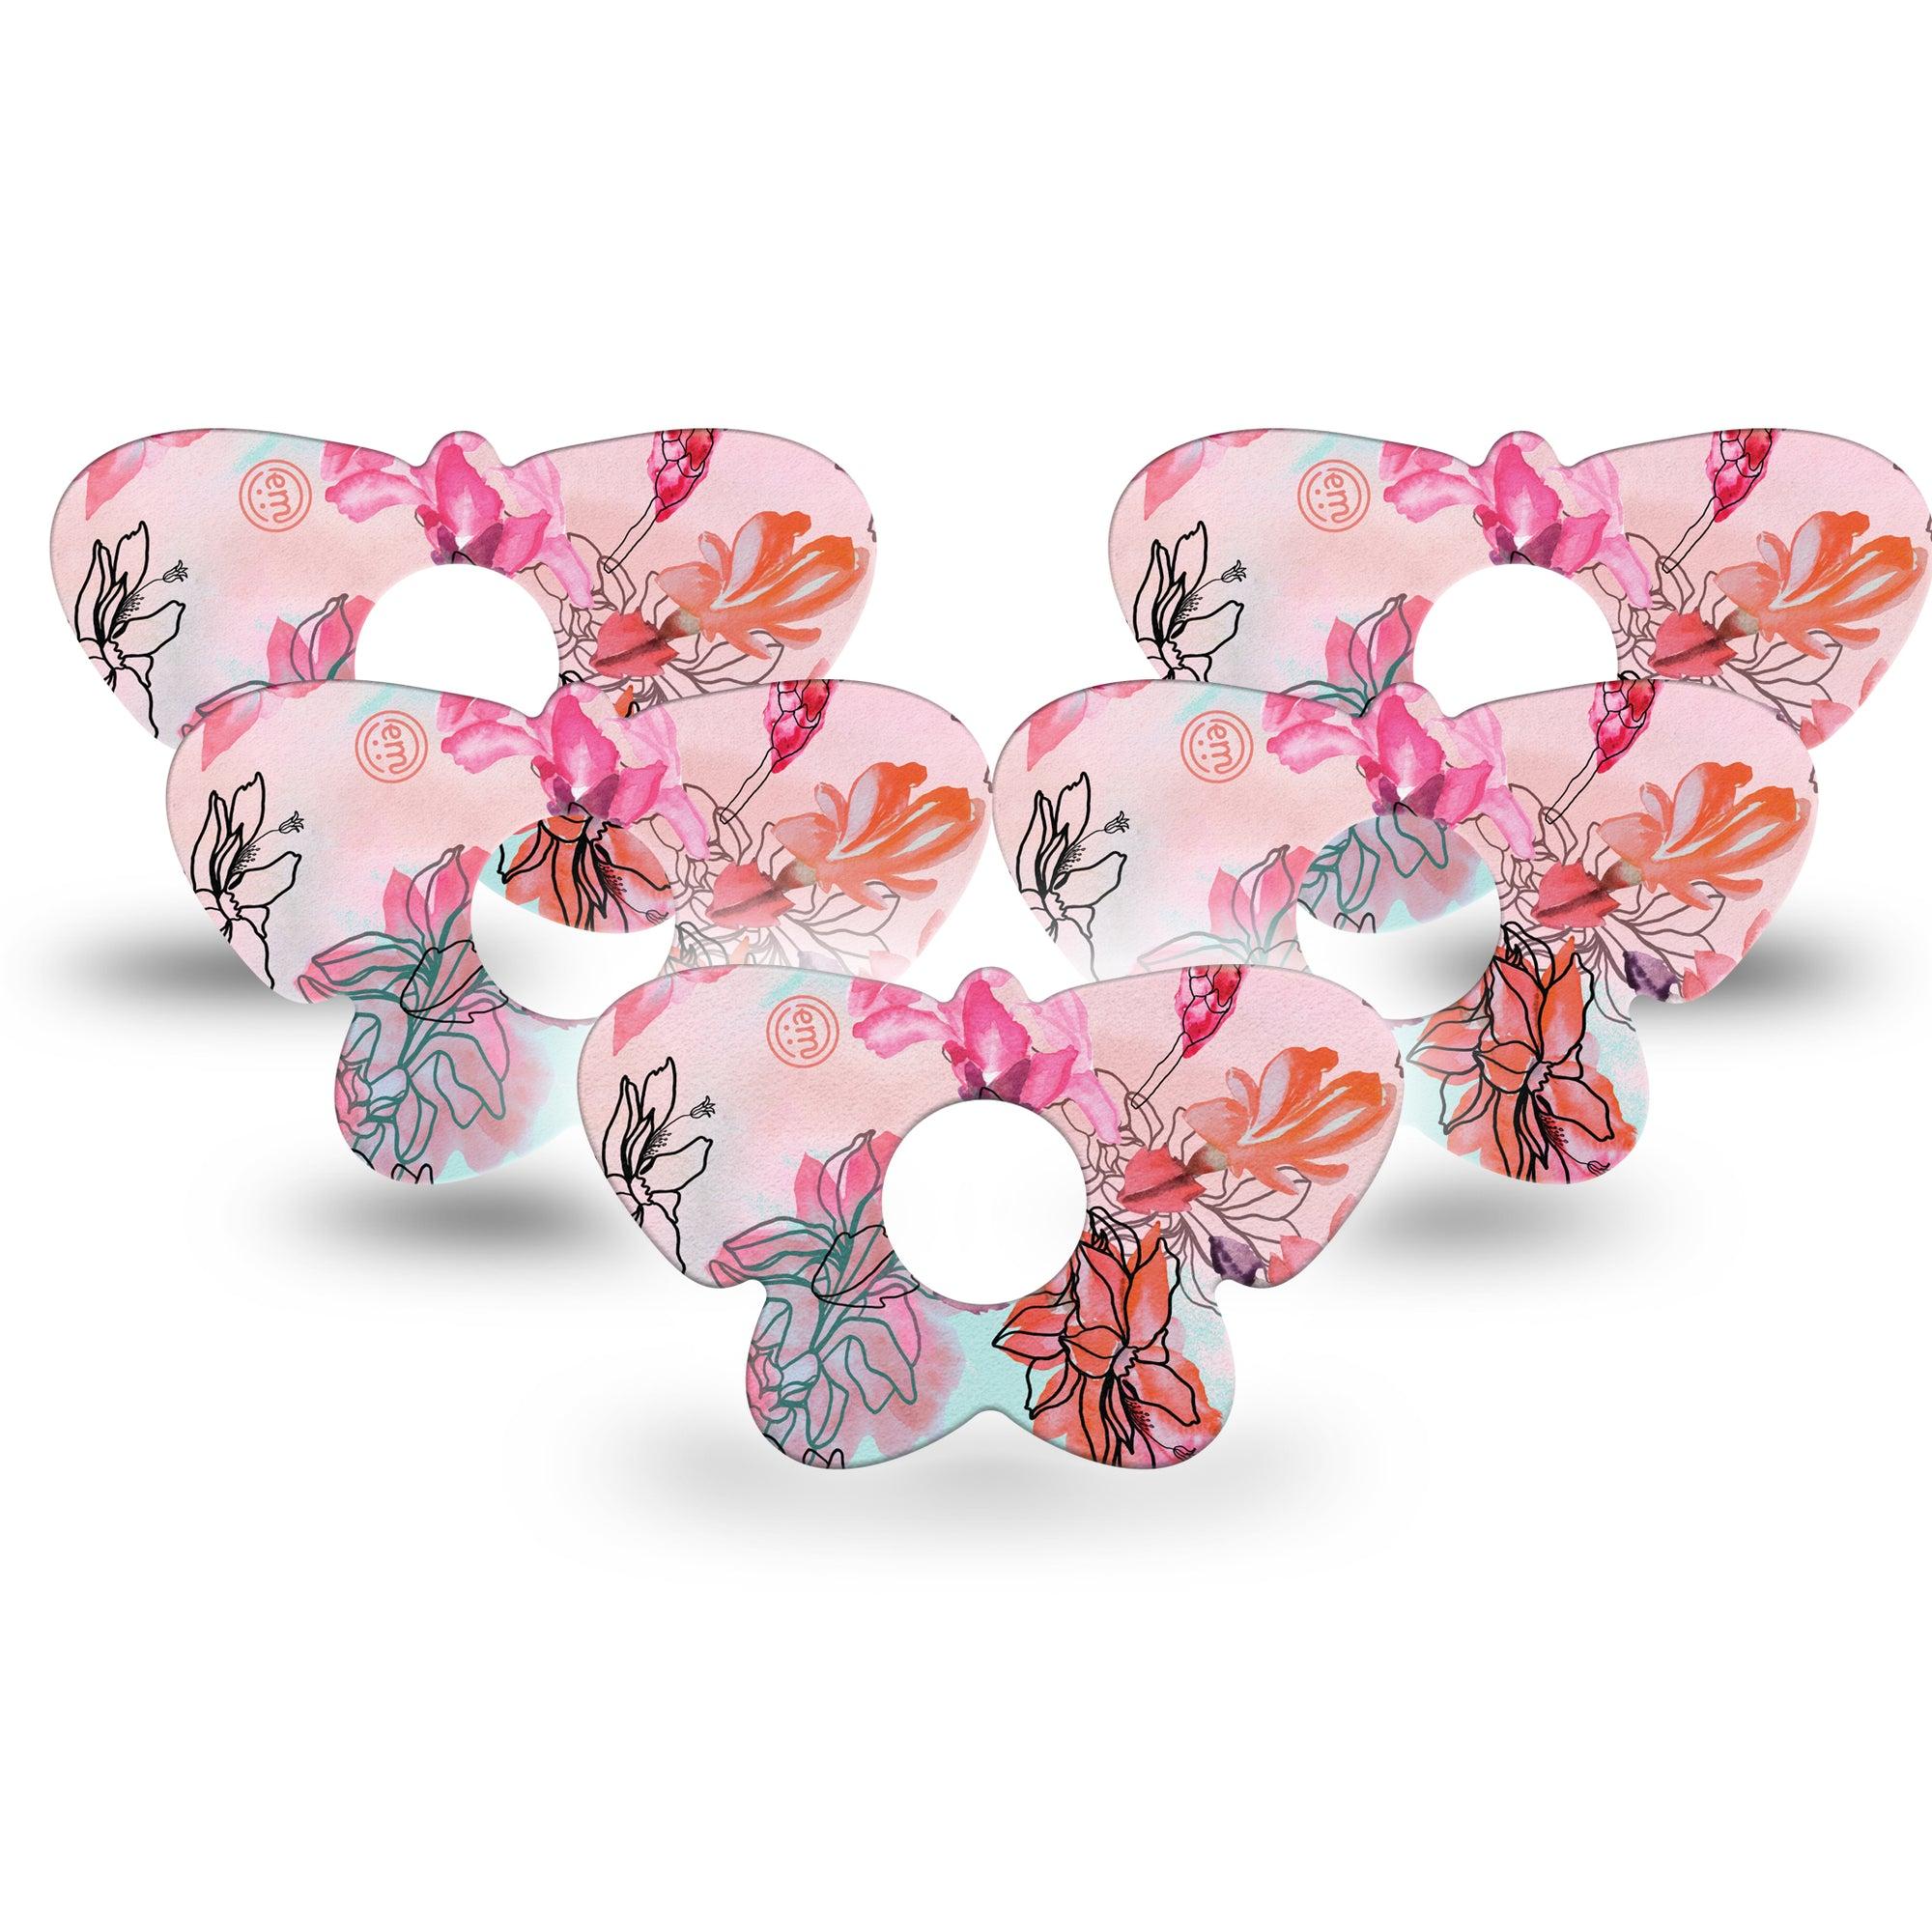 ExpressionMed Whimsical Blossoms Butterfly Libre 3 Tape, 5-Pack, Impulsive Flower Themed, CGM Overlay Patch Design